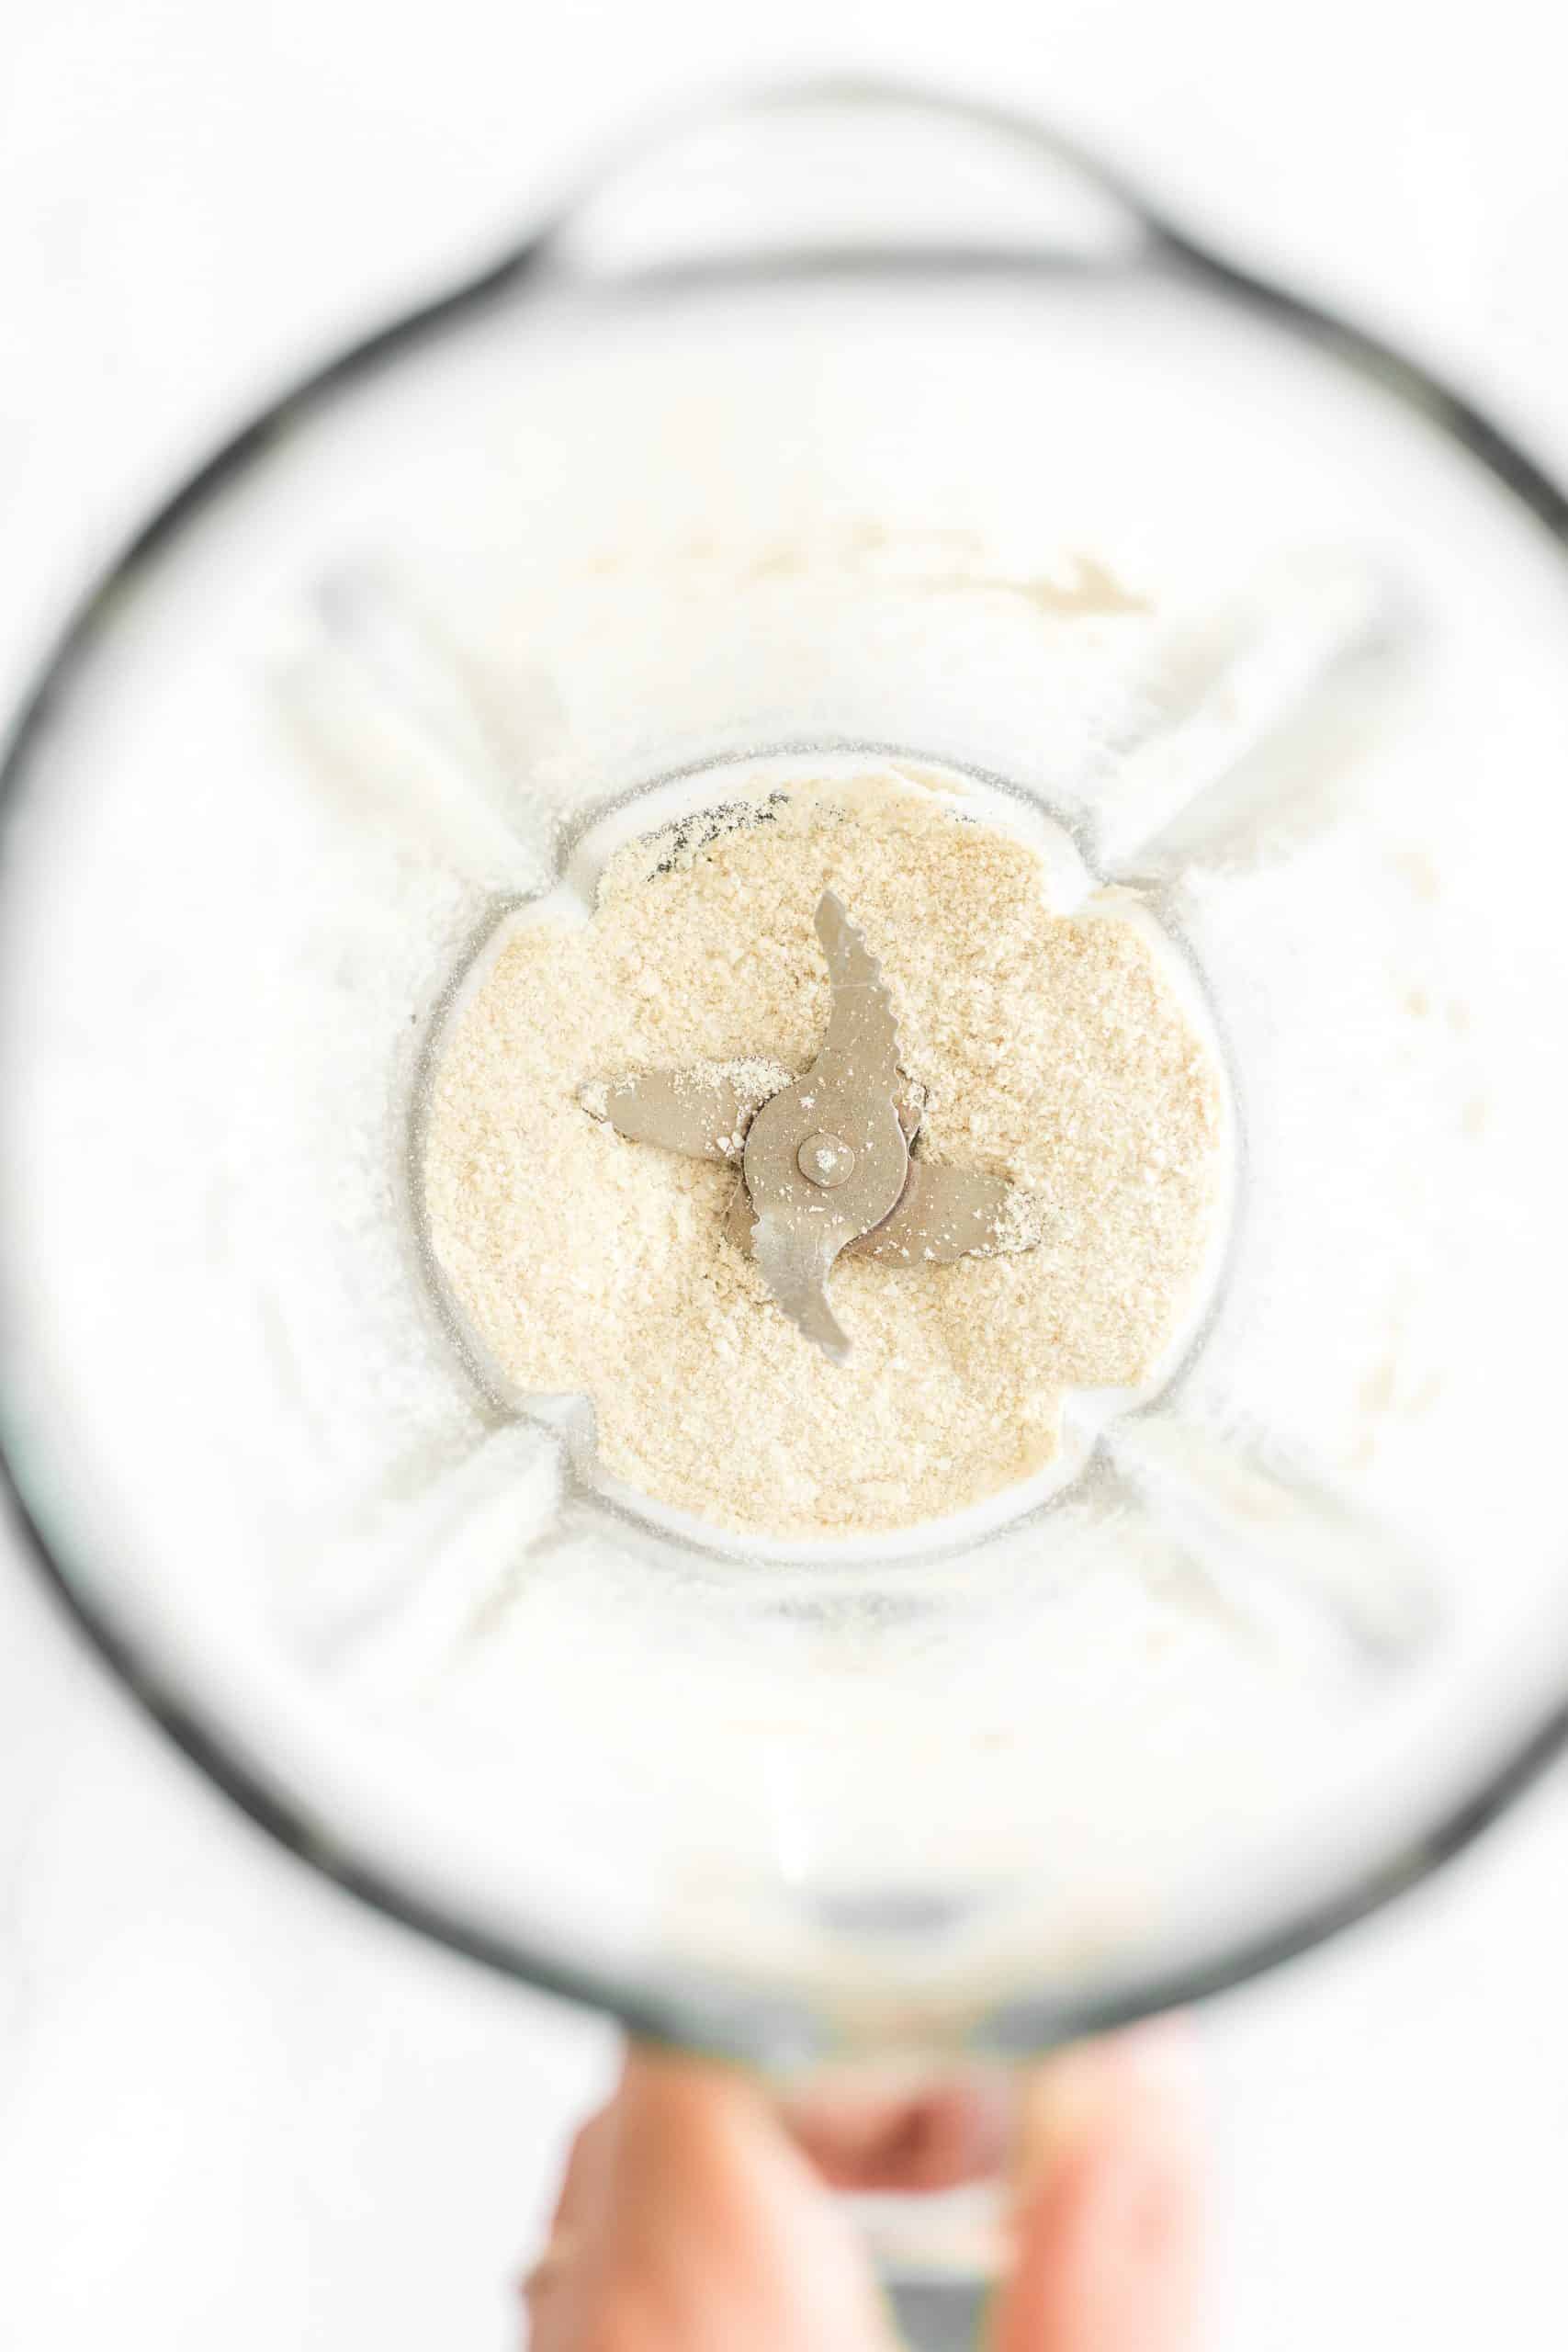 Processed rice flour in a blender.